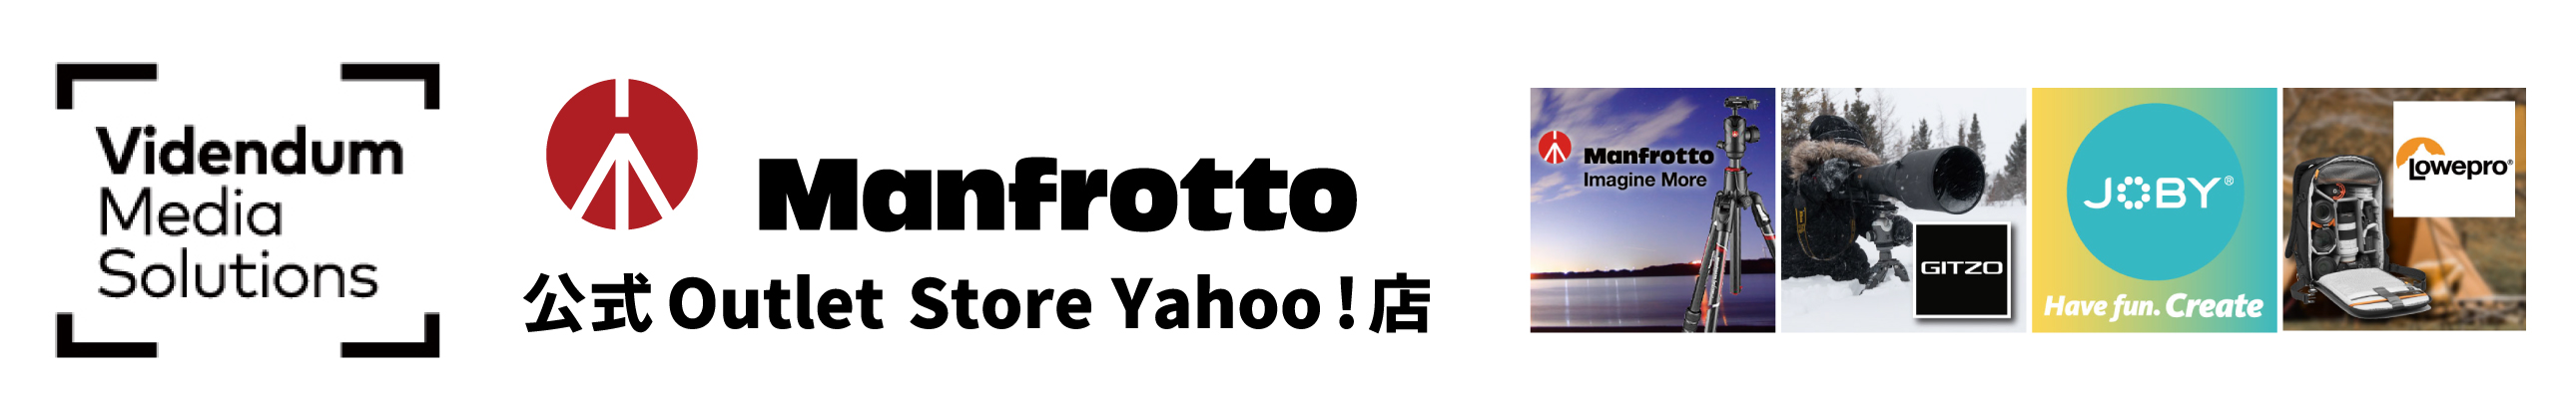 Manfrotto Outlet Store Yahoo!店 ヘッダー画像